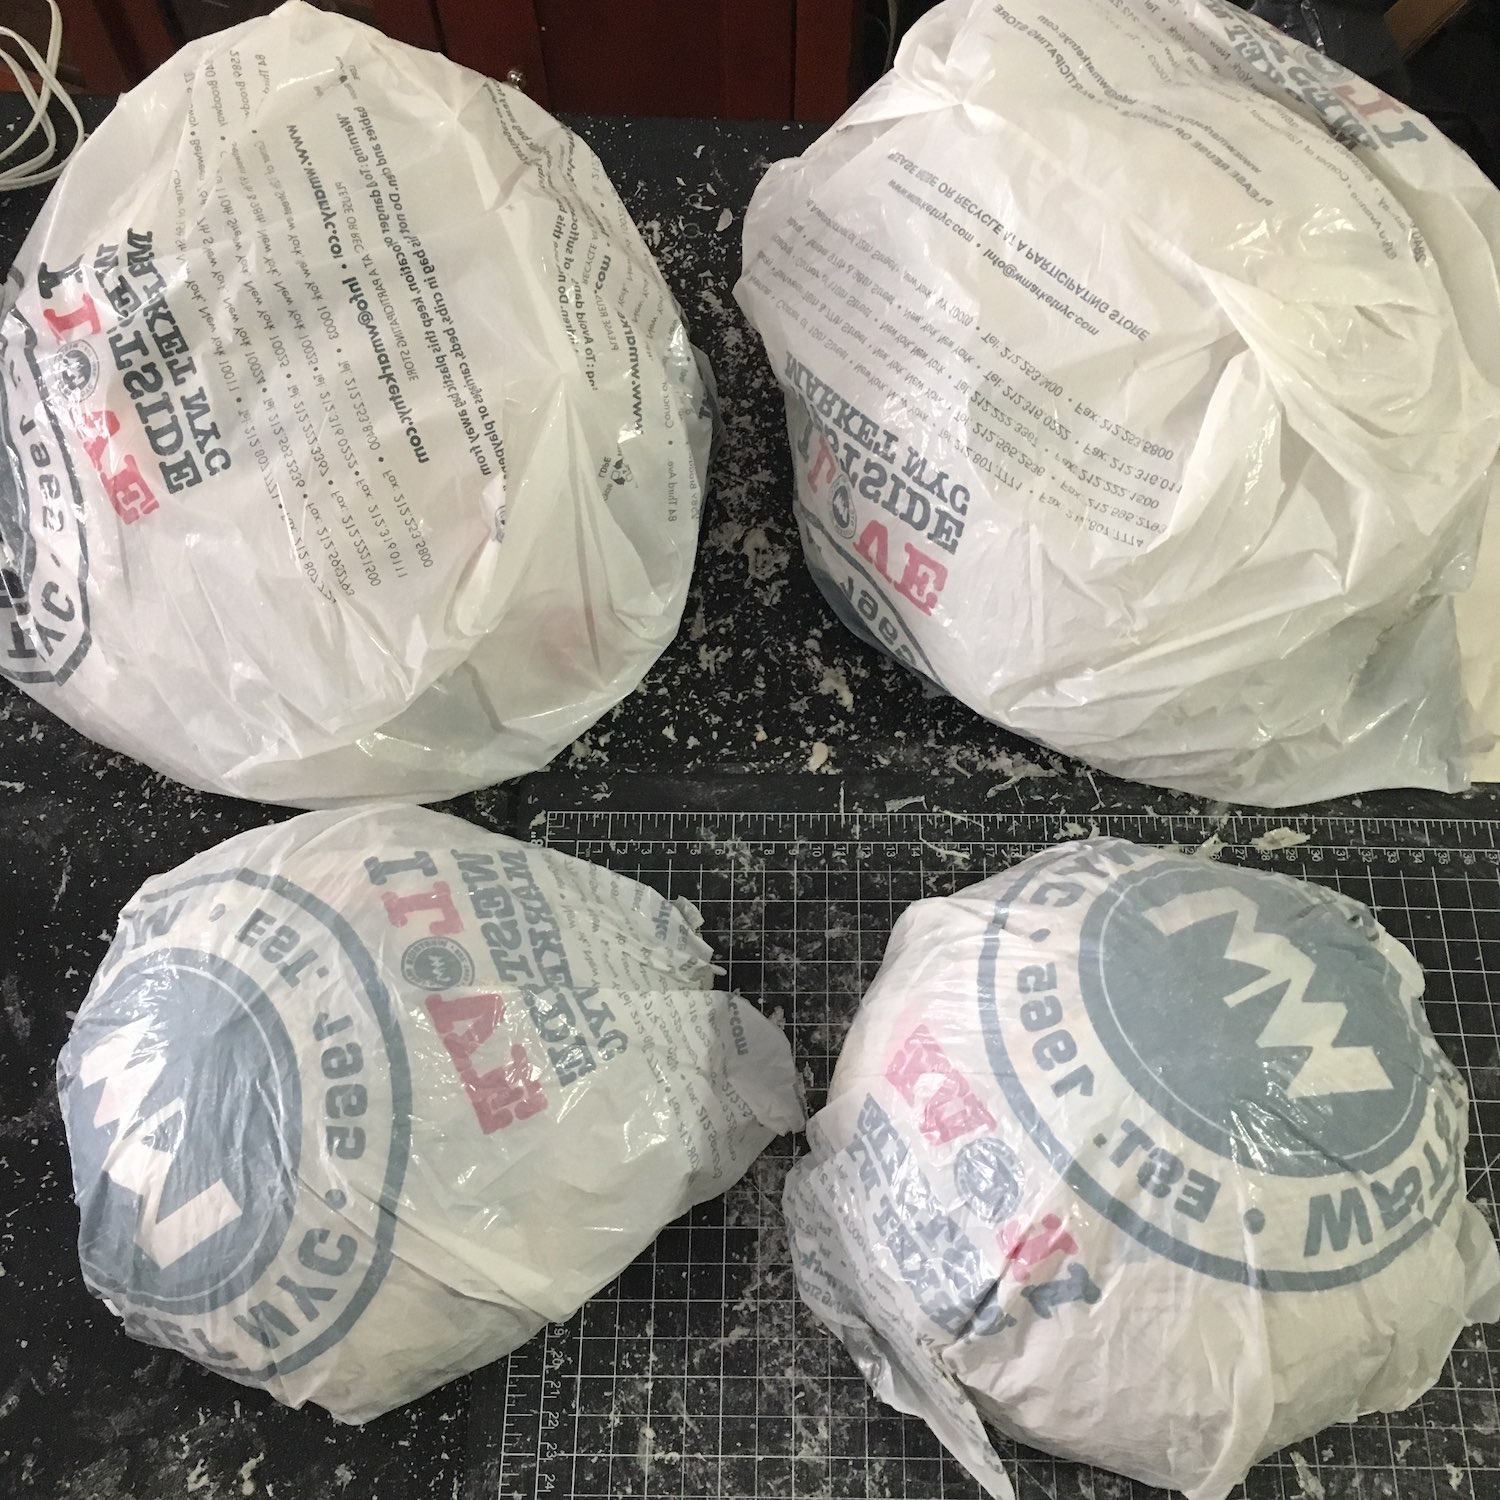 Four papier-mâché domes covered in plastic, sitting together on a table